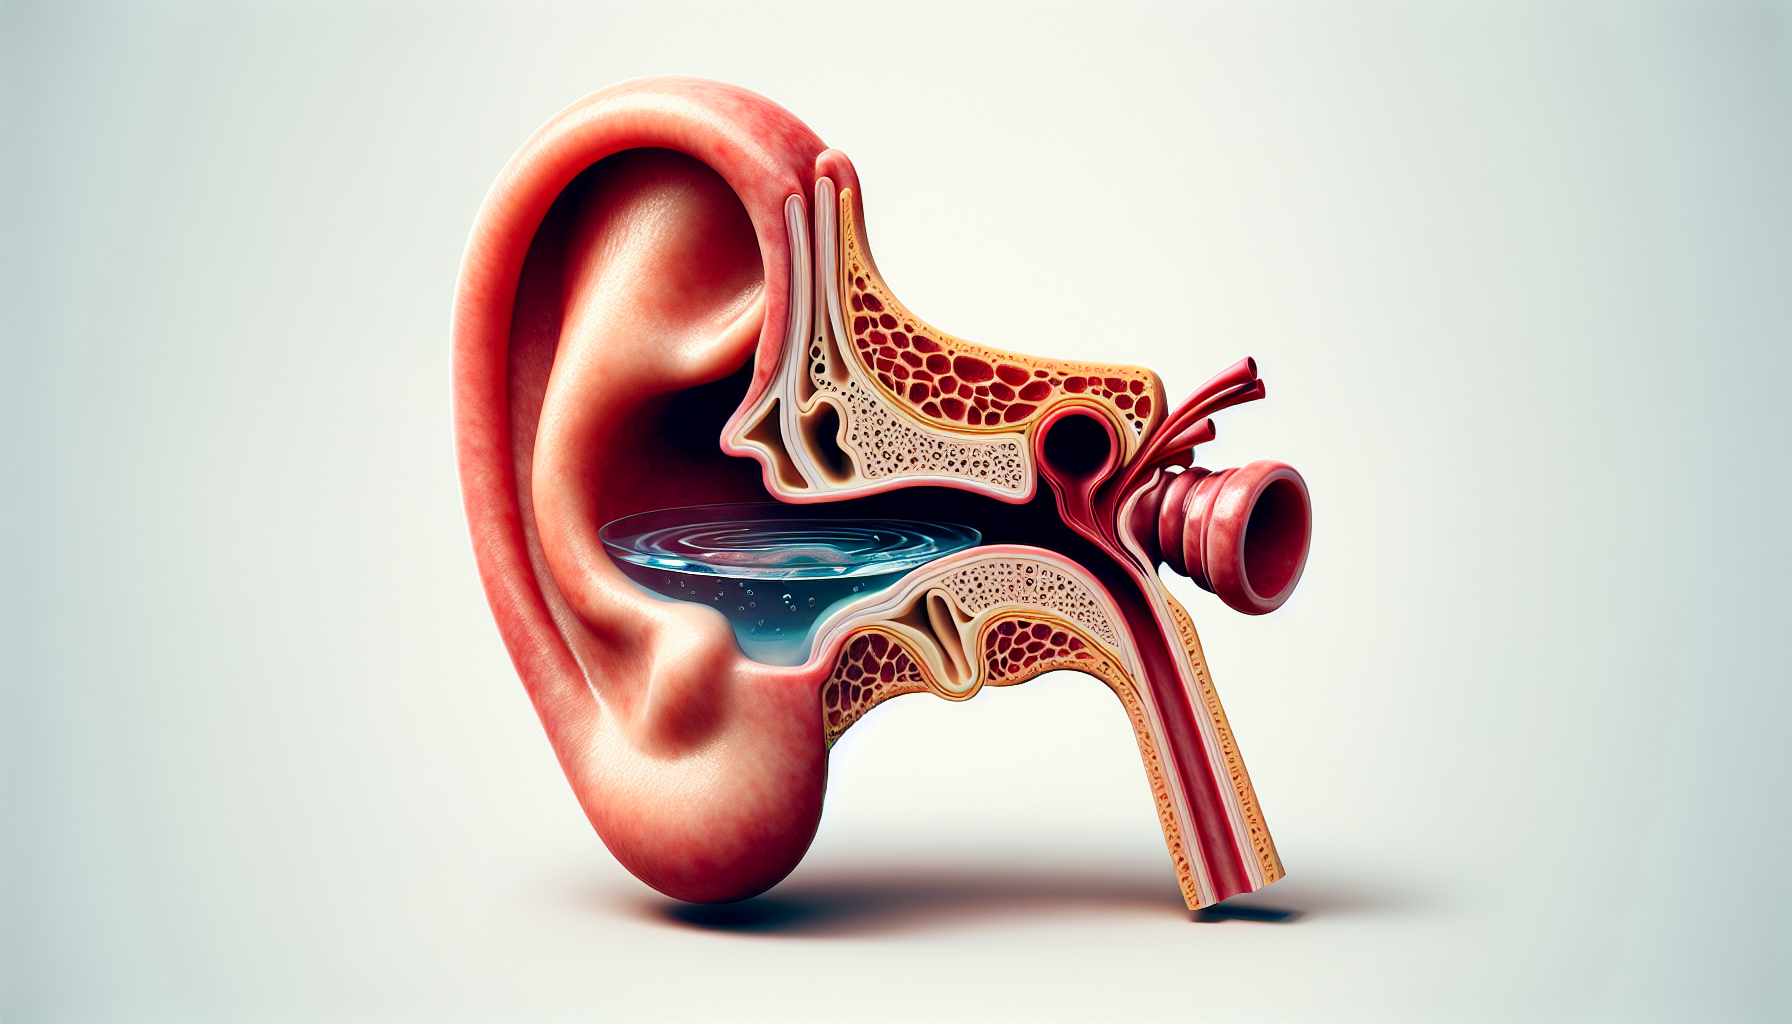 Water trapped in the ear canal